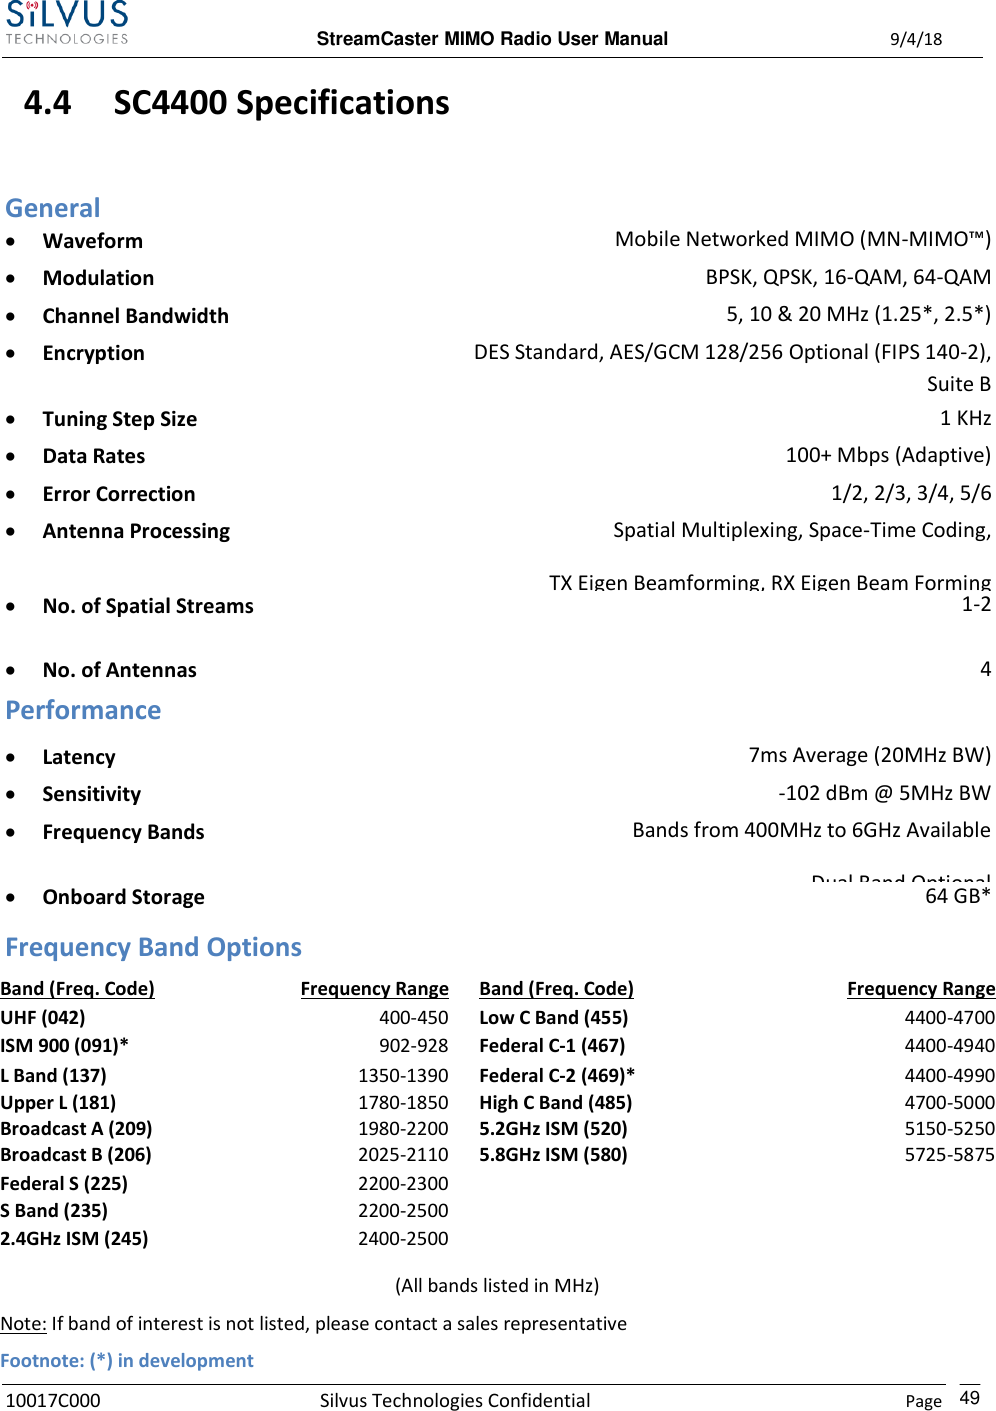  StreamCaster MIMO Radio User Manual  9/4/18 10017C000 Silvus Technologies Confidential    Page    49 4.4 SC4400 Specifications General  Waveform Mobile Networked MIMO (MN-MIMO™)  Modulation BPSK, QPSK, 16-QAM, 64-QAM  Channel Bandwidth 5, 10 &amp; 20 MHz (1.25*, 2.5*)  Encryption DES Standard, AES/GCM 128/256 Optional (FIPS 140-2), Suite B  Tuning Step Size 1 KHz  Data Rates 100+ Mbps (Adaptive)  Error Correction 1/2, 2/3, 3/4, 5/6  Antenna Processing Spatial Multiplexing, Space-Time Coding, TX Eigen Beamforming, RX Eigen Beam Forming  No. of Spatial Streams 1-2  No. of Antennas  Total Power Output 4 1mW – 4W (variable) (up to 8W Effective w/ TX Beamforming)   Performance   Latency 7ms Average (20MHz BW)  Sensitivity -102 dBm @ 5MHz BW  Frequency Bands Bands from 400MHz to 6GHz Available Dual Band Optional  Onboard Storage 64 GB* Frequency Band Options  Band (Freq. Code) Frequency Range  Band (Freq. Code) Frequency Range UHF (042) 400-450   Low C Band (455) 4400-4700 ISM 900 (091)* 902-928   Federal C-1 (467) 4400-4940 L Band (137) 1350-1390   Federal C-2 (469)* 4400-4990 Upper L (181) 1780-1850  High C Band (485) 4700-5000 Broadcast A (209) 1980-2200  5.2GHz ISM (520) 5150-5250 Broadcast B (206) 2025-2110   5.8GHz ISM (580) 5725-5875 Federal S (225) 2200-2300     S Band (235) 2200-2500       2.4GHz ISM (245) 2400-2500          (All bands listed in MHz) Note: If band of interest is not listed, please contact a sales representative  Footnote: (*) in development      